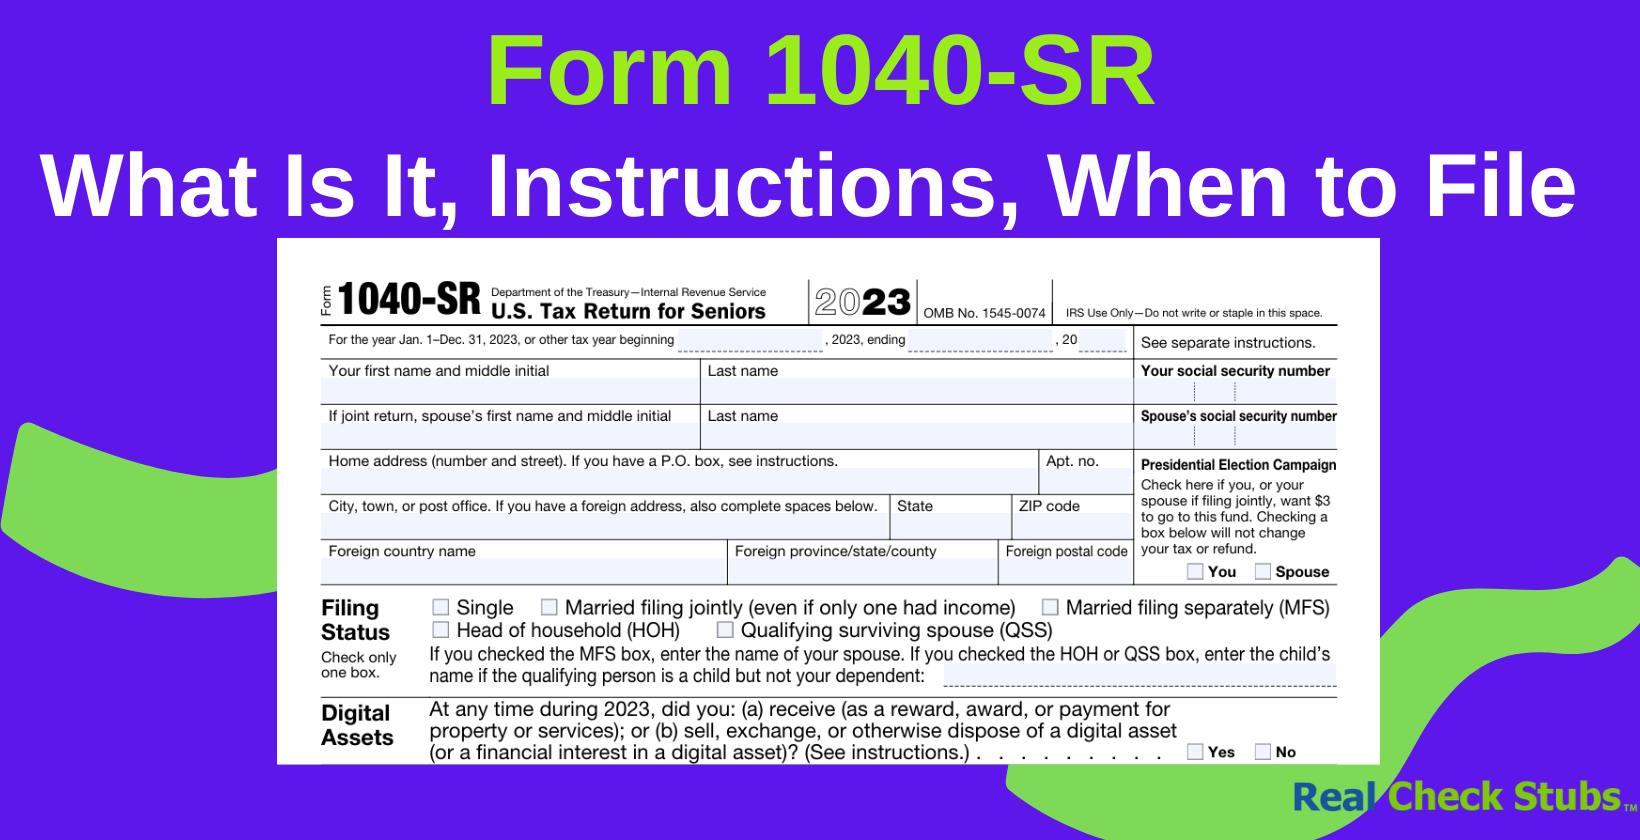 Form 1040-SR: Purpose, Instructions, Filling Out